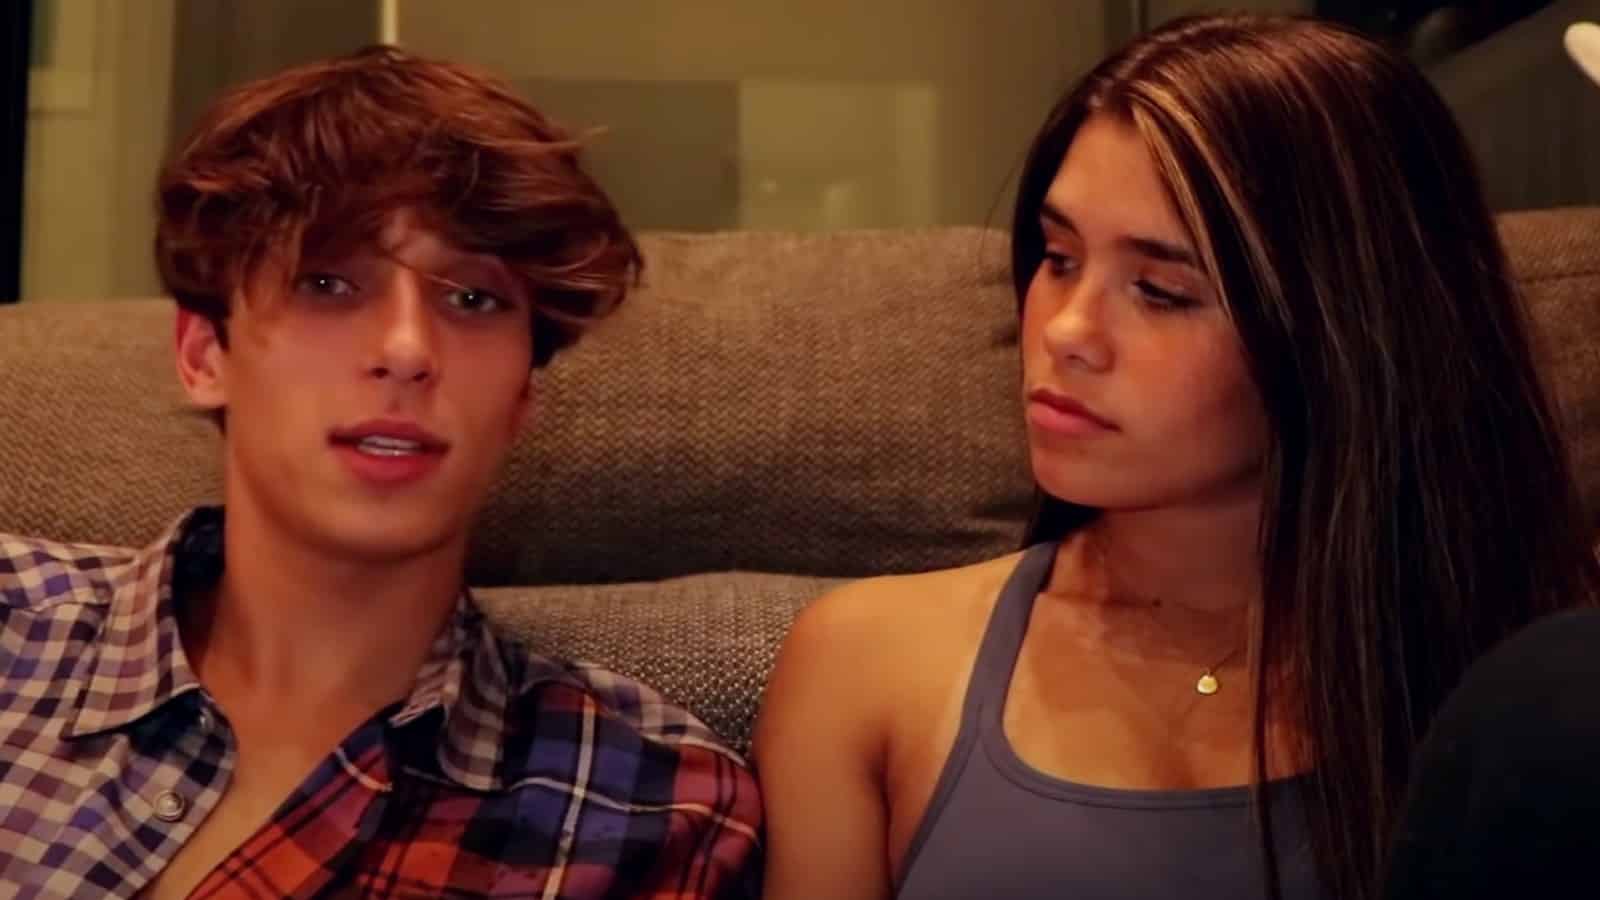 Josh Richards and Nessa Barrett in a YouTube video together